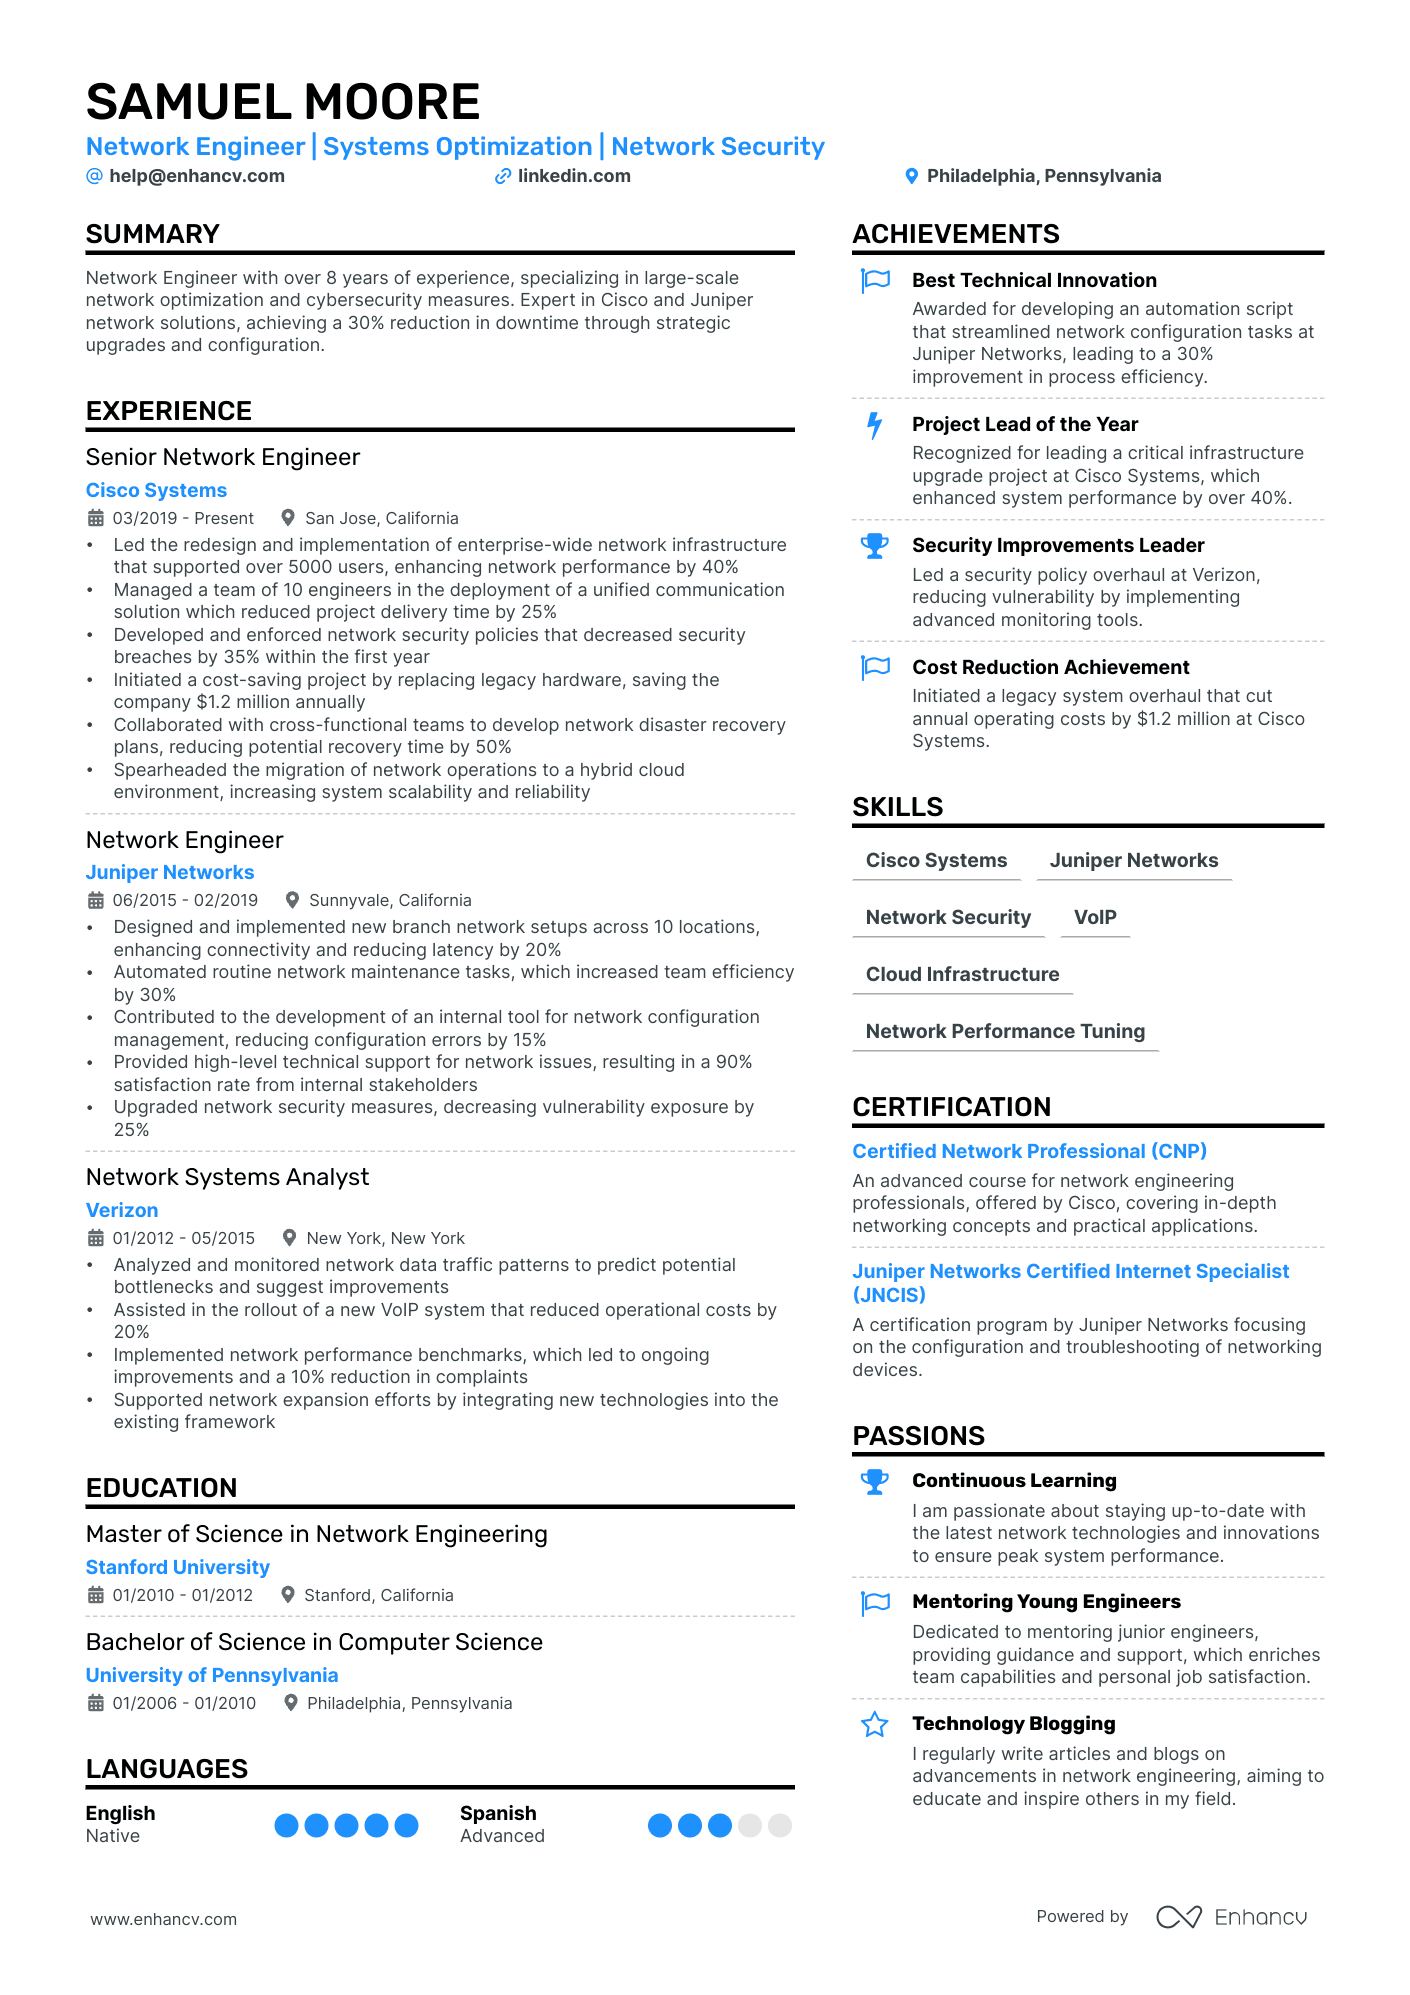 Network Engineer | Systems Optimization | Network Security resume example